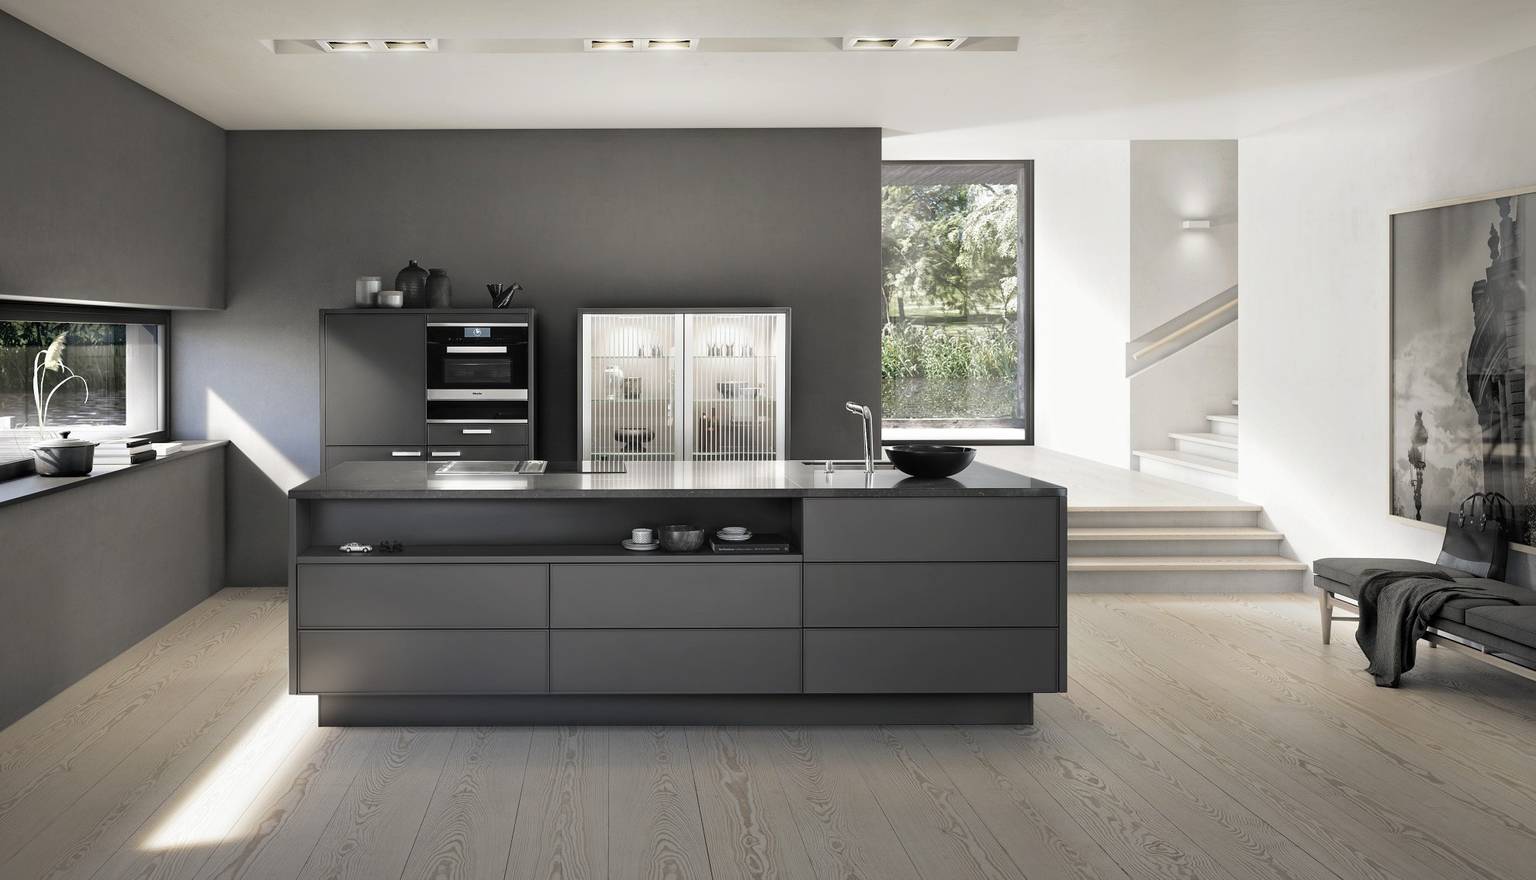 SieMatic Pure SE 3003 R in umbra matte lacquer with kitchen island